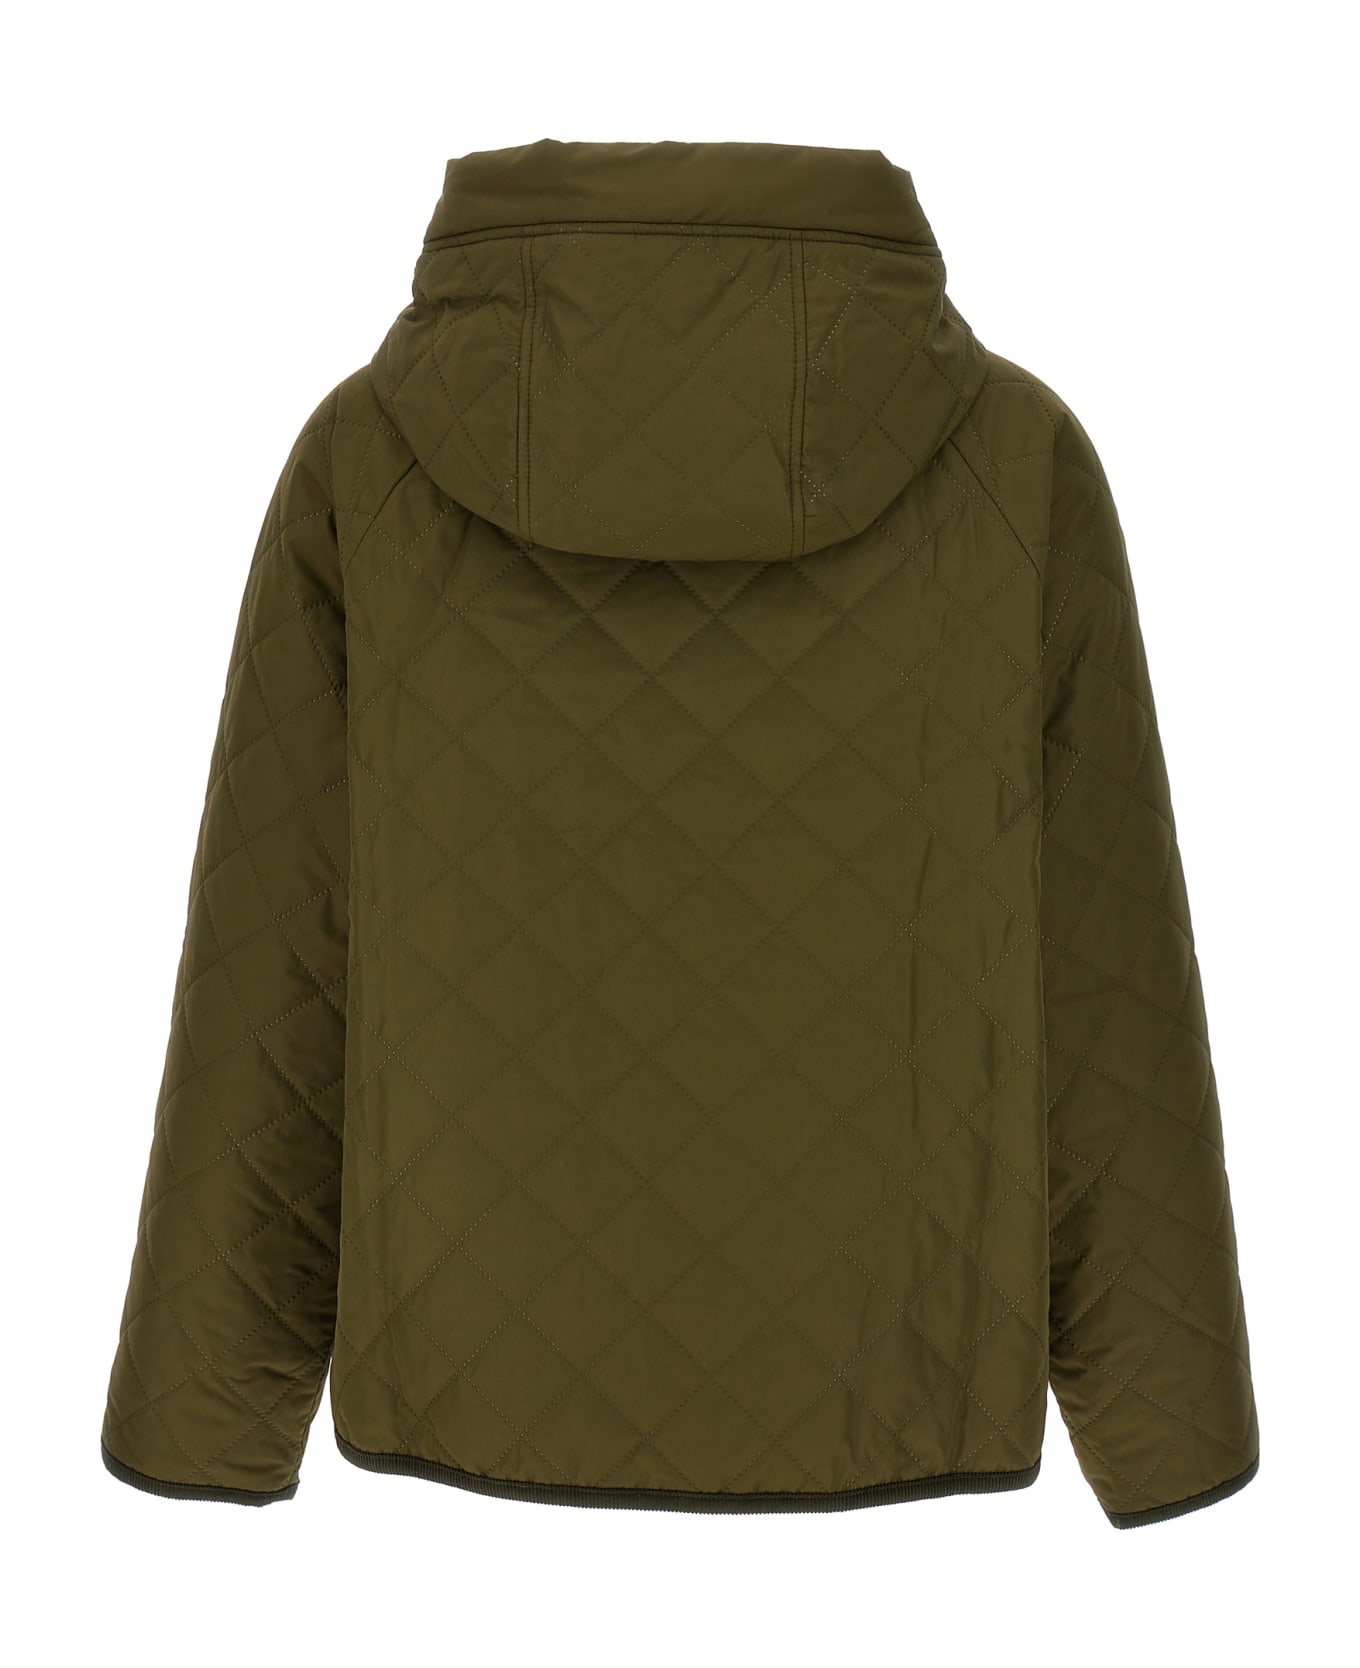 Barbour 'glamis' Hooded Jacket Barbour - MILITARY GREEN